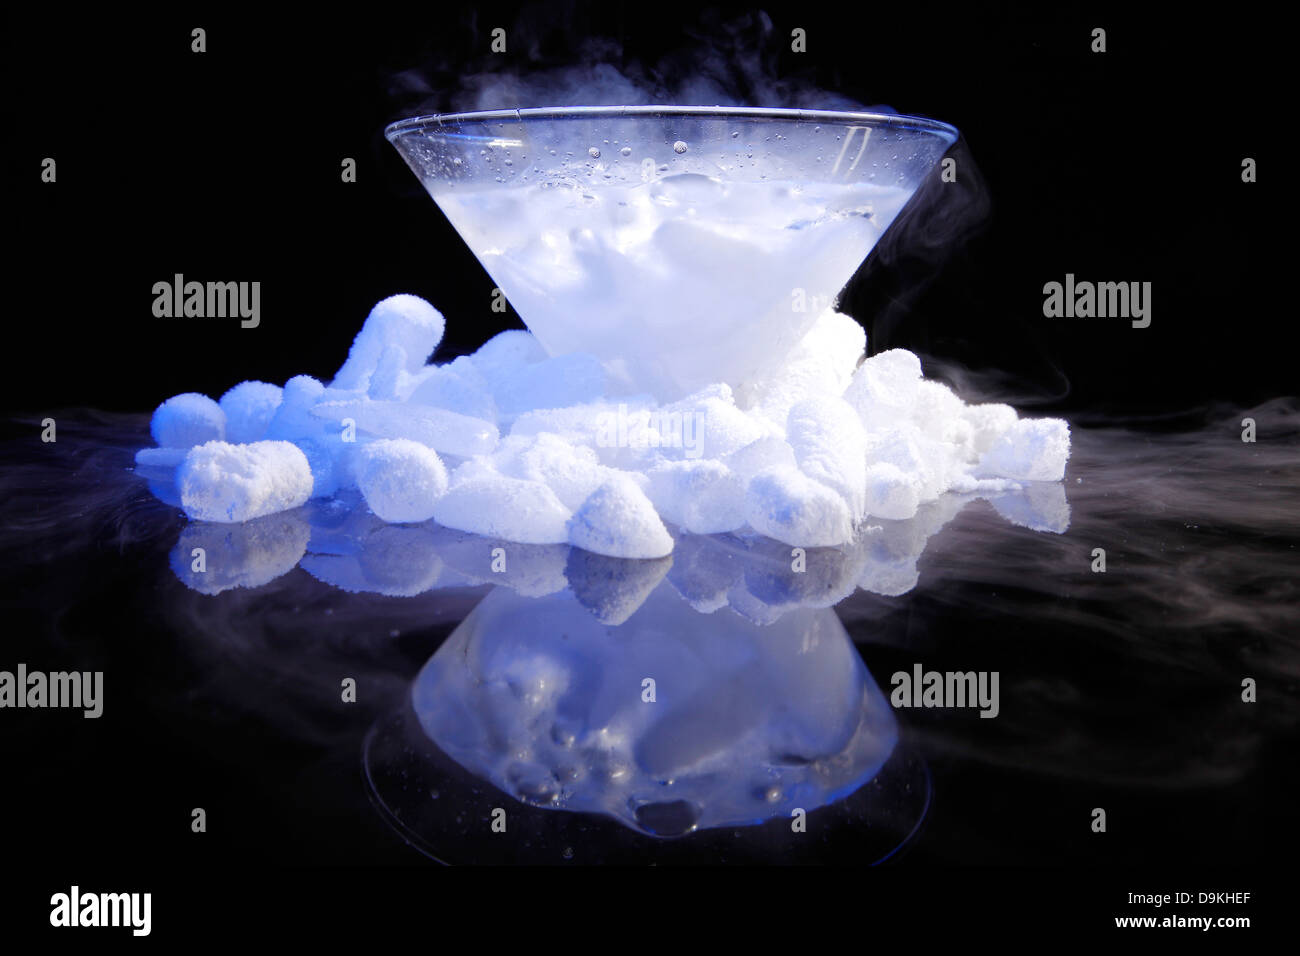 ice, smoke, solid, cold, mystery, carbon, dry ice, carbon dioxide, action Stock Photo